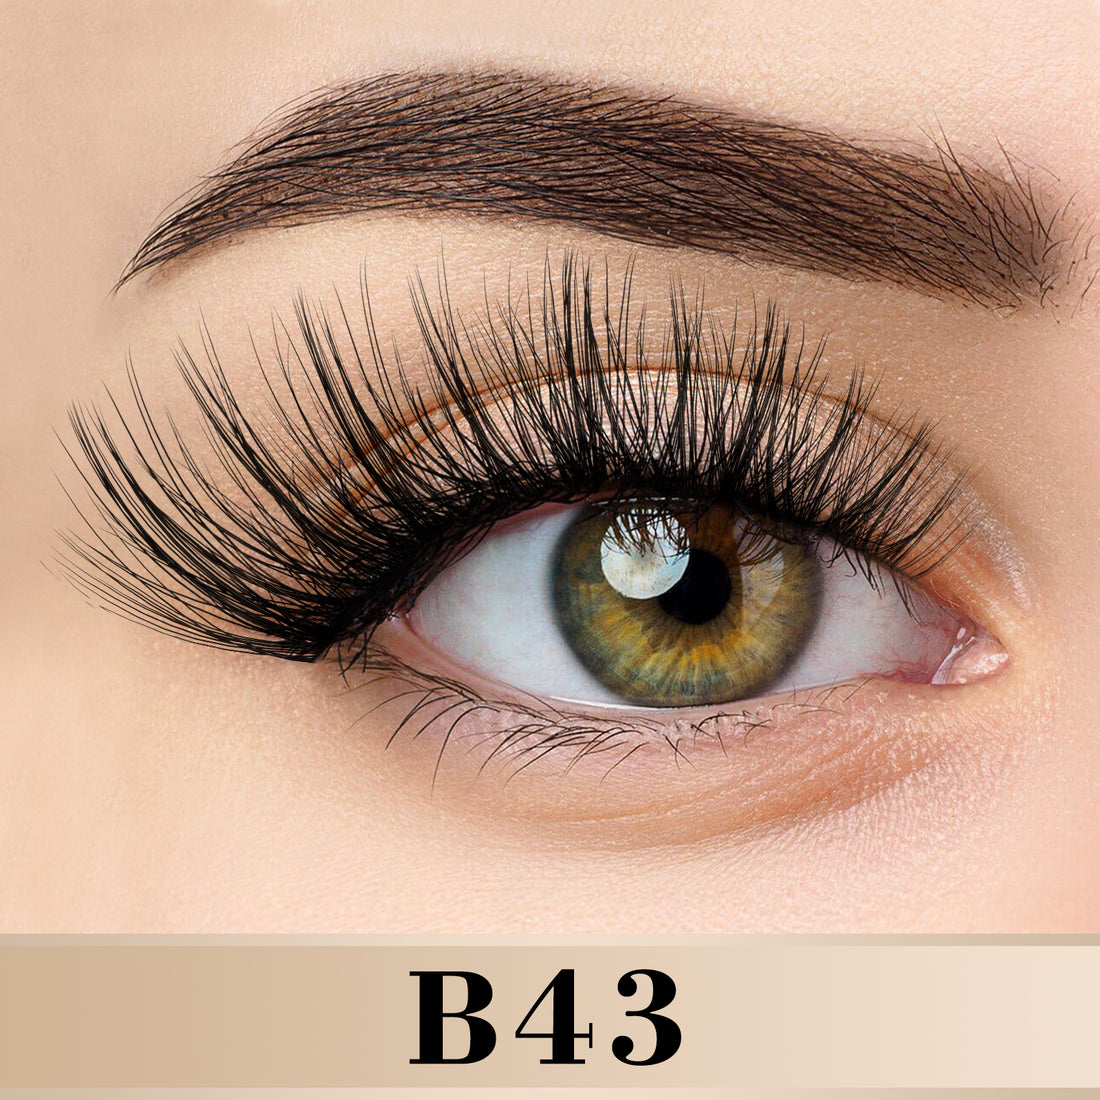 Free, just pay shipping|B43 Lash Clusters DIY Eyelash Extensions 72 Clusters Lashes